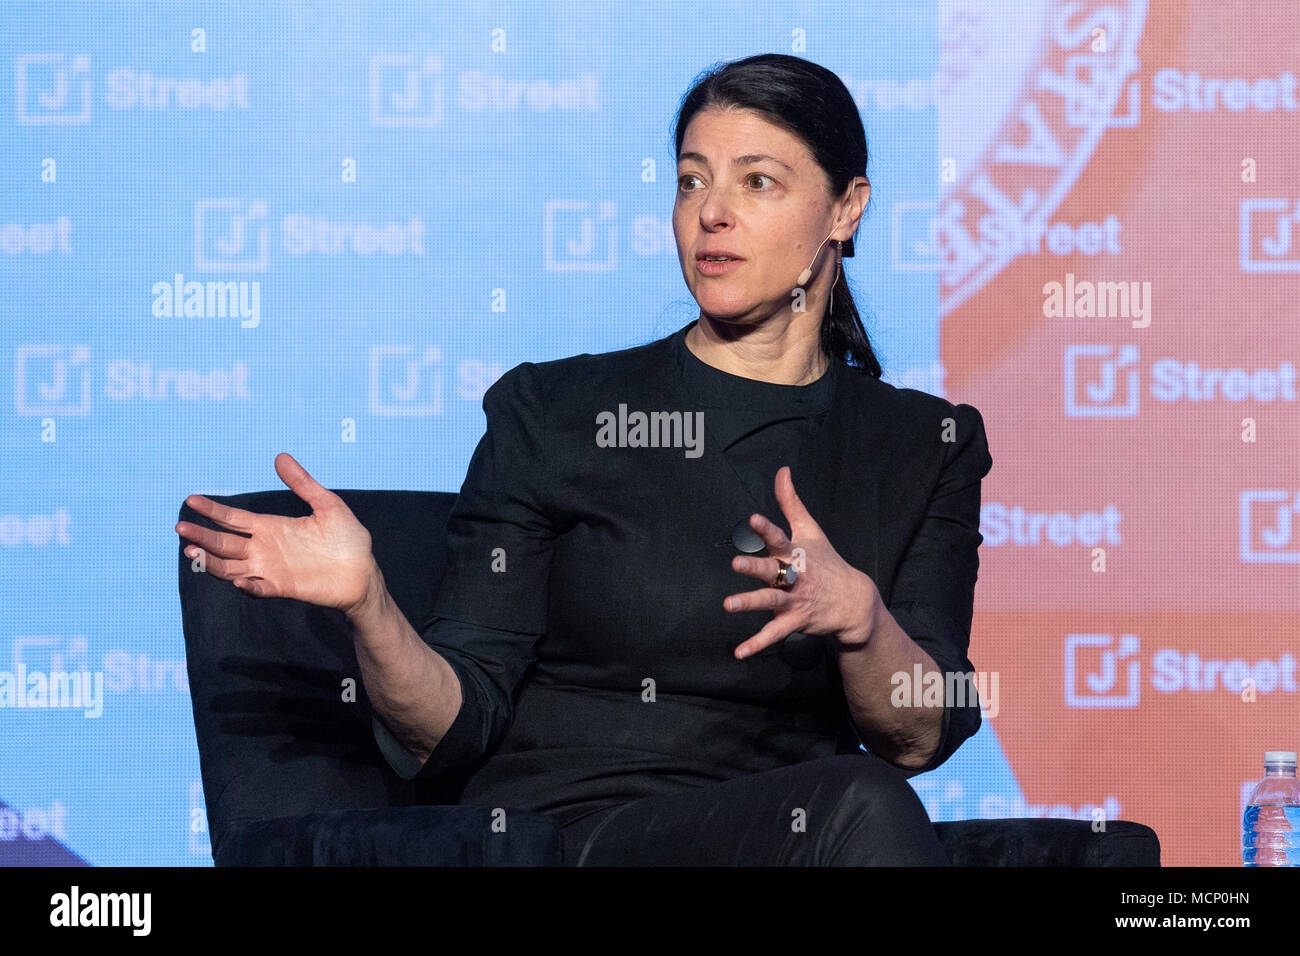 Knesset member Merav Michaeli (Zionist Union) speaking at the J Street National Conference. Stock Photo